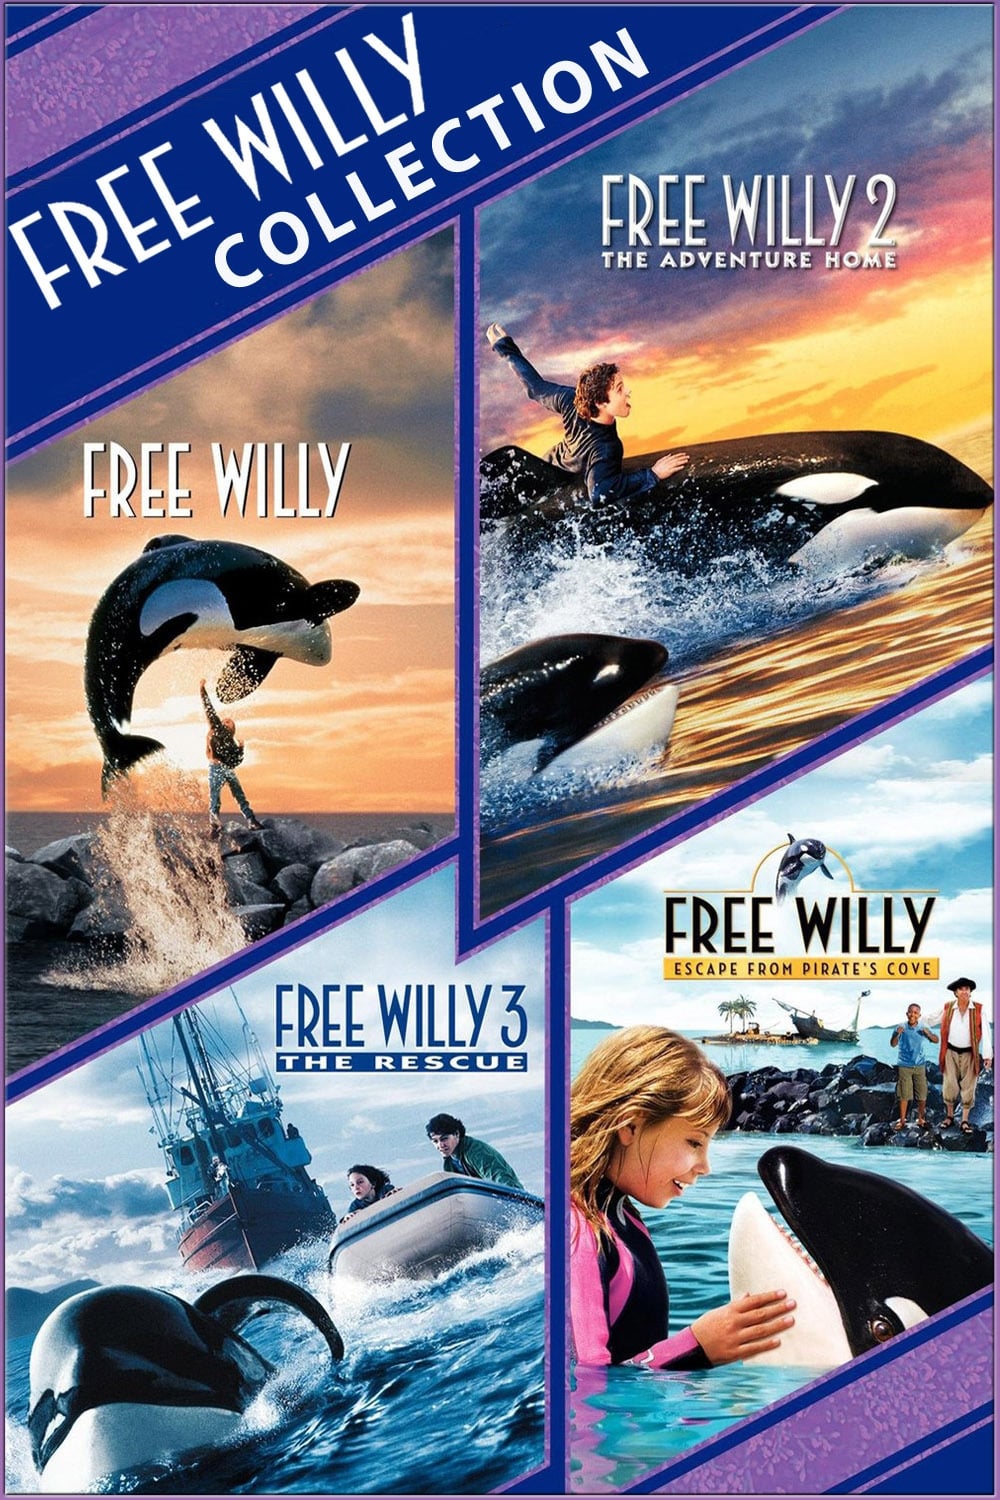 free willy 2 online subtitulada